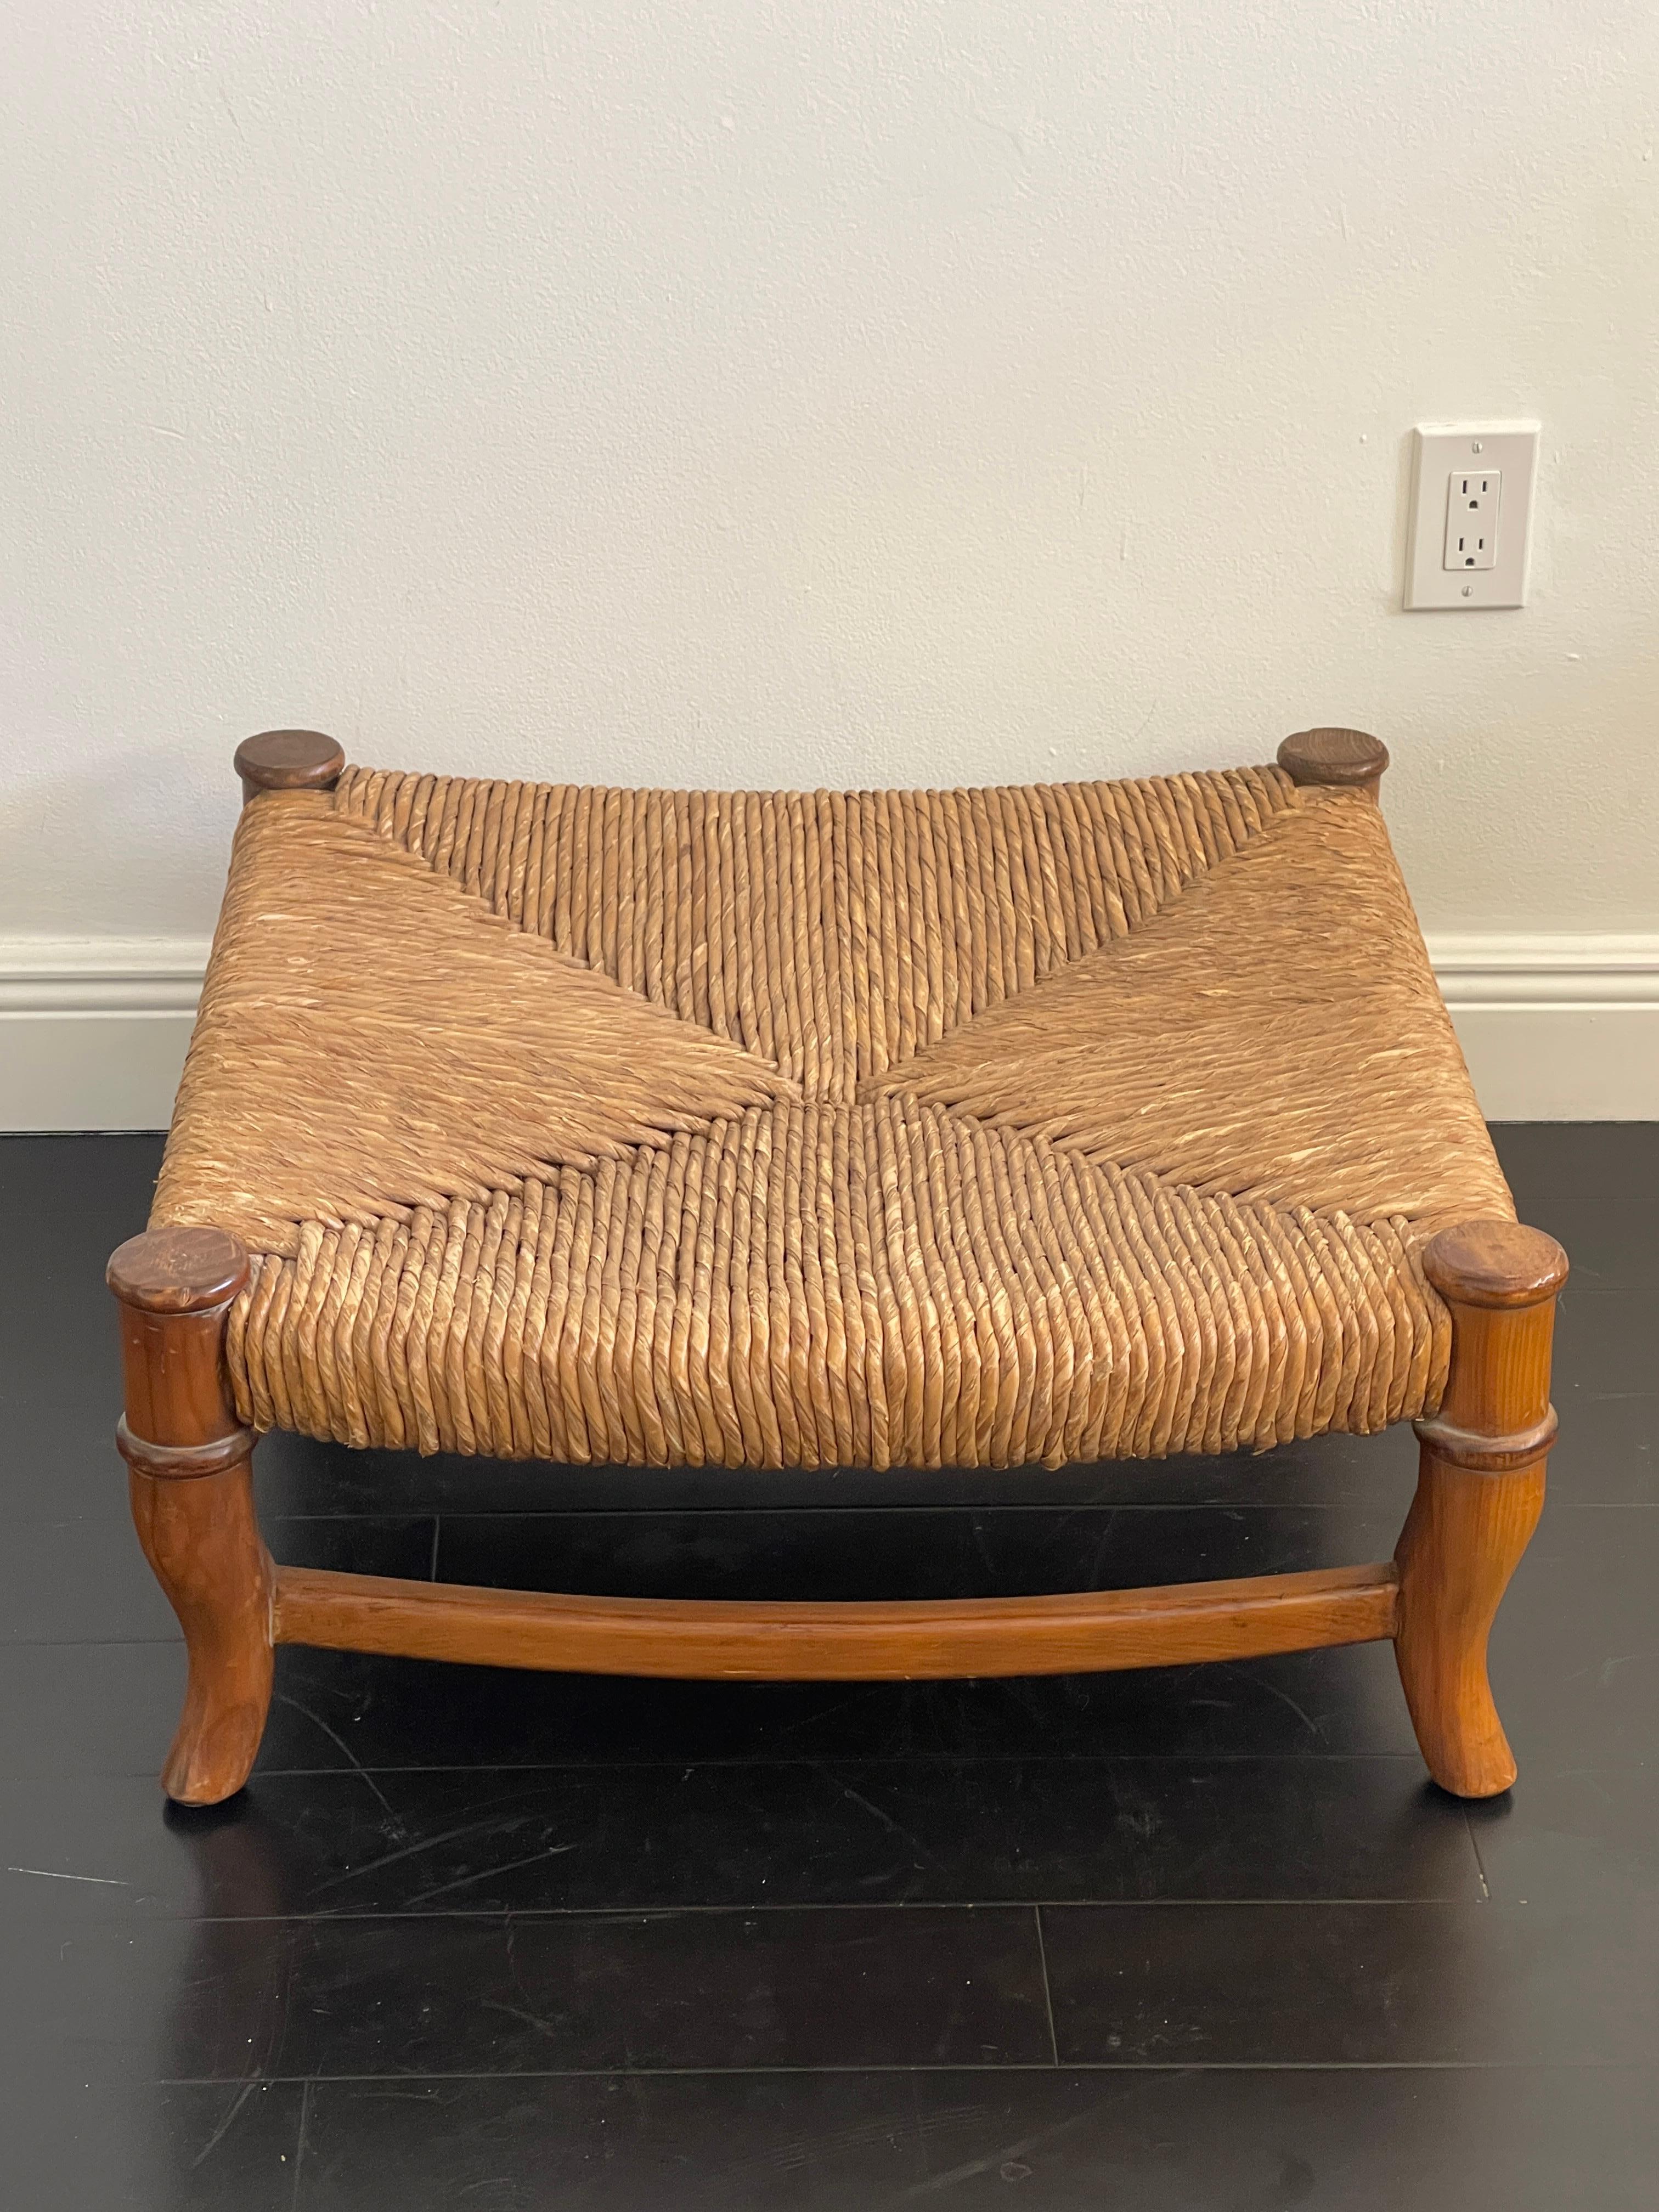 20th Century Hand Woven Wicker and Wood Ottoman In Good Condition For Sale In Miami, FL